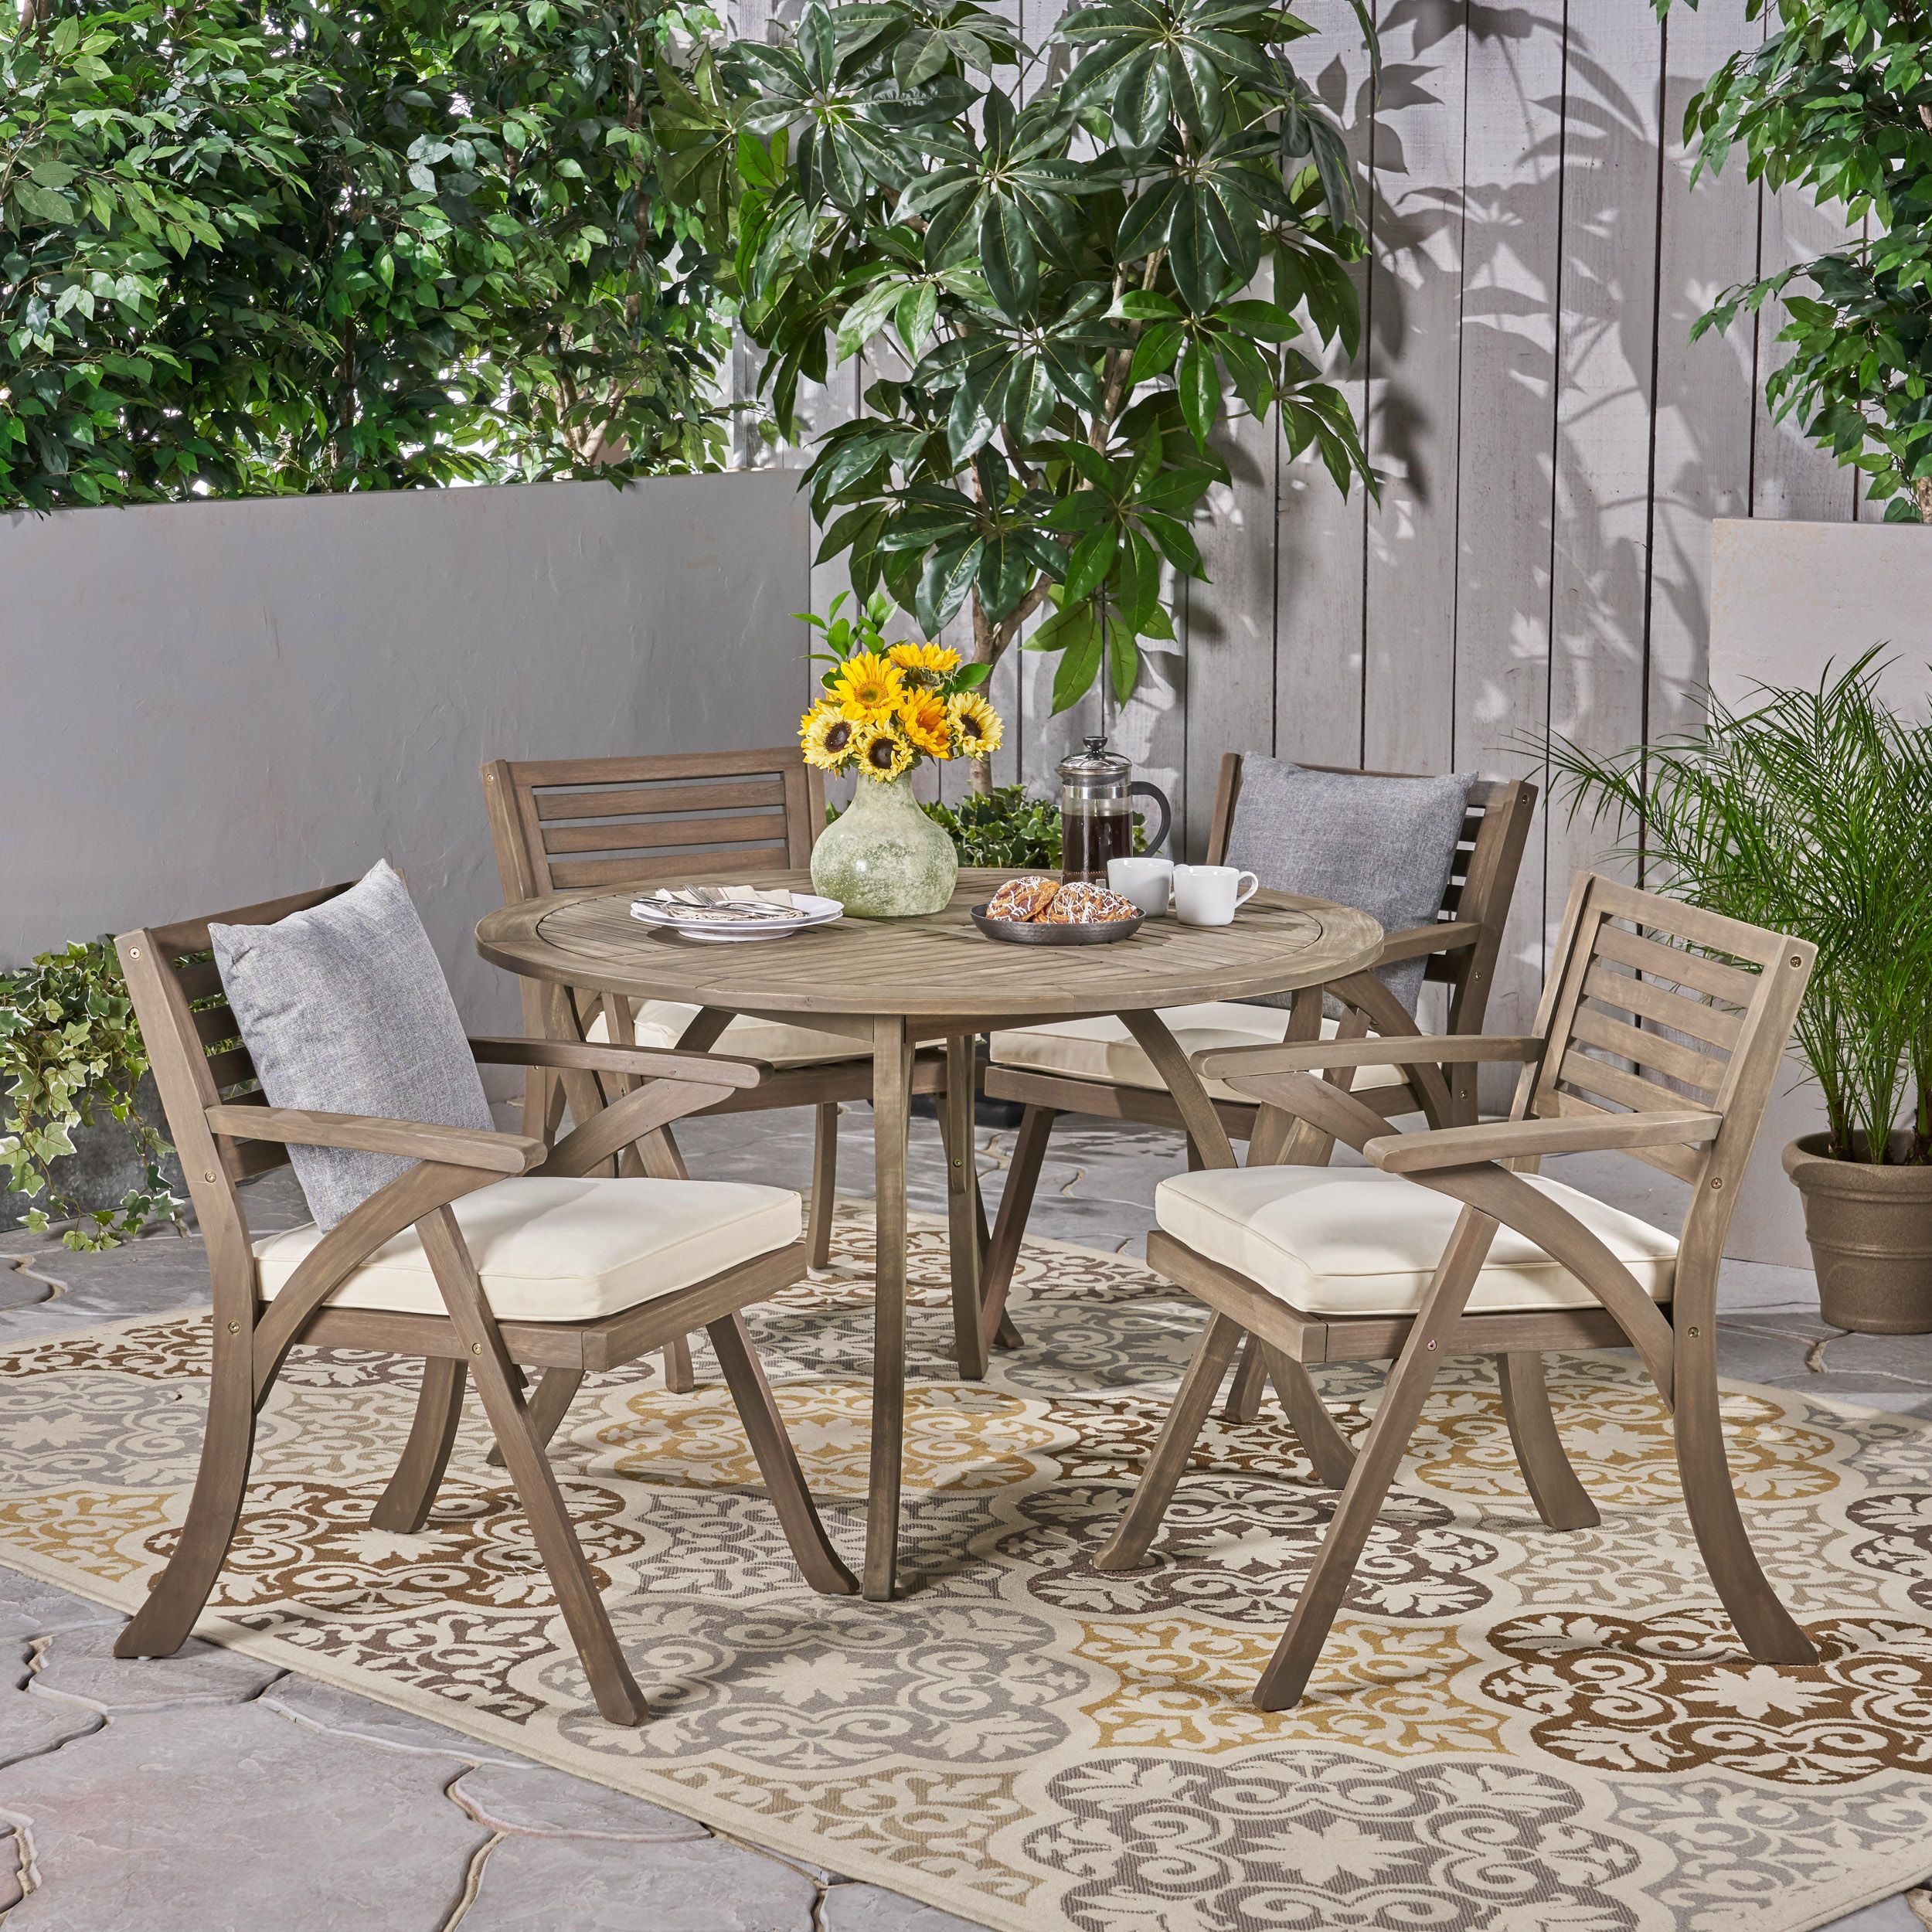 Jordy Outdoor 5 Piece Acacia Wood Dining Set With Round Table, Gray In Round 5 Piece Outdoor Patio Dining Sets (View 1 of 15)